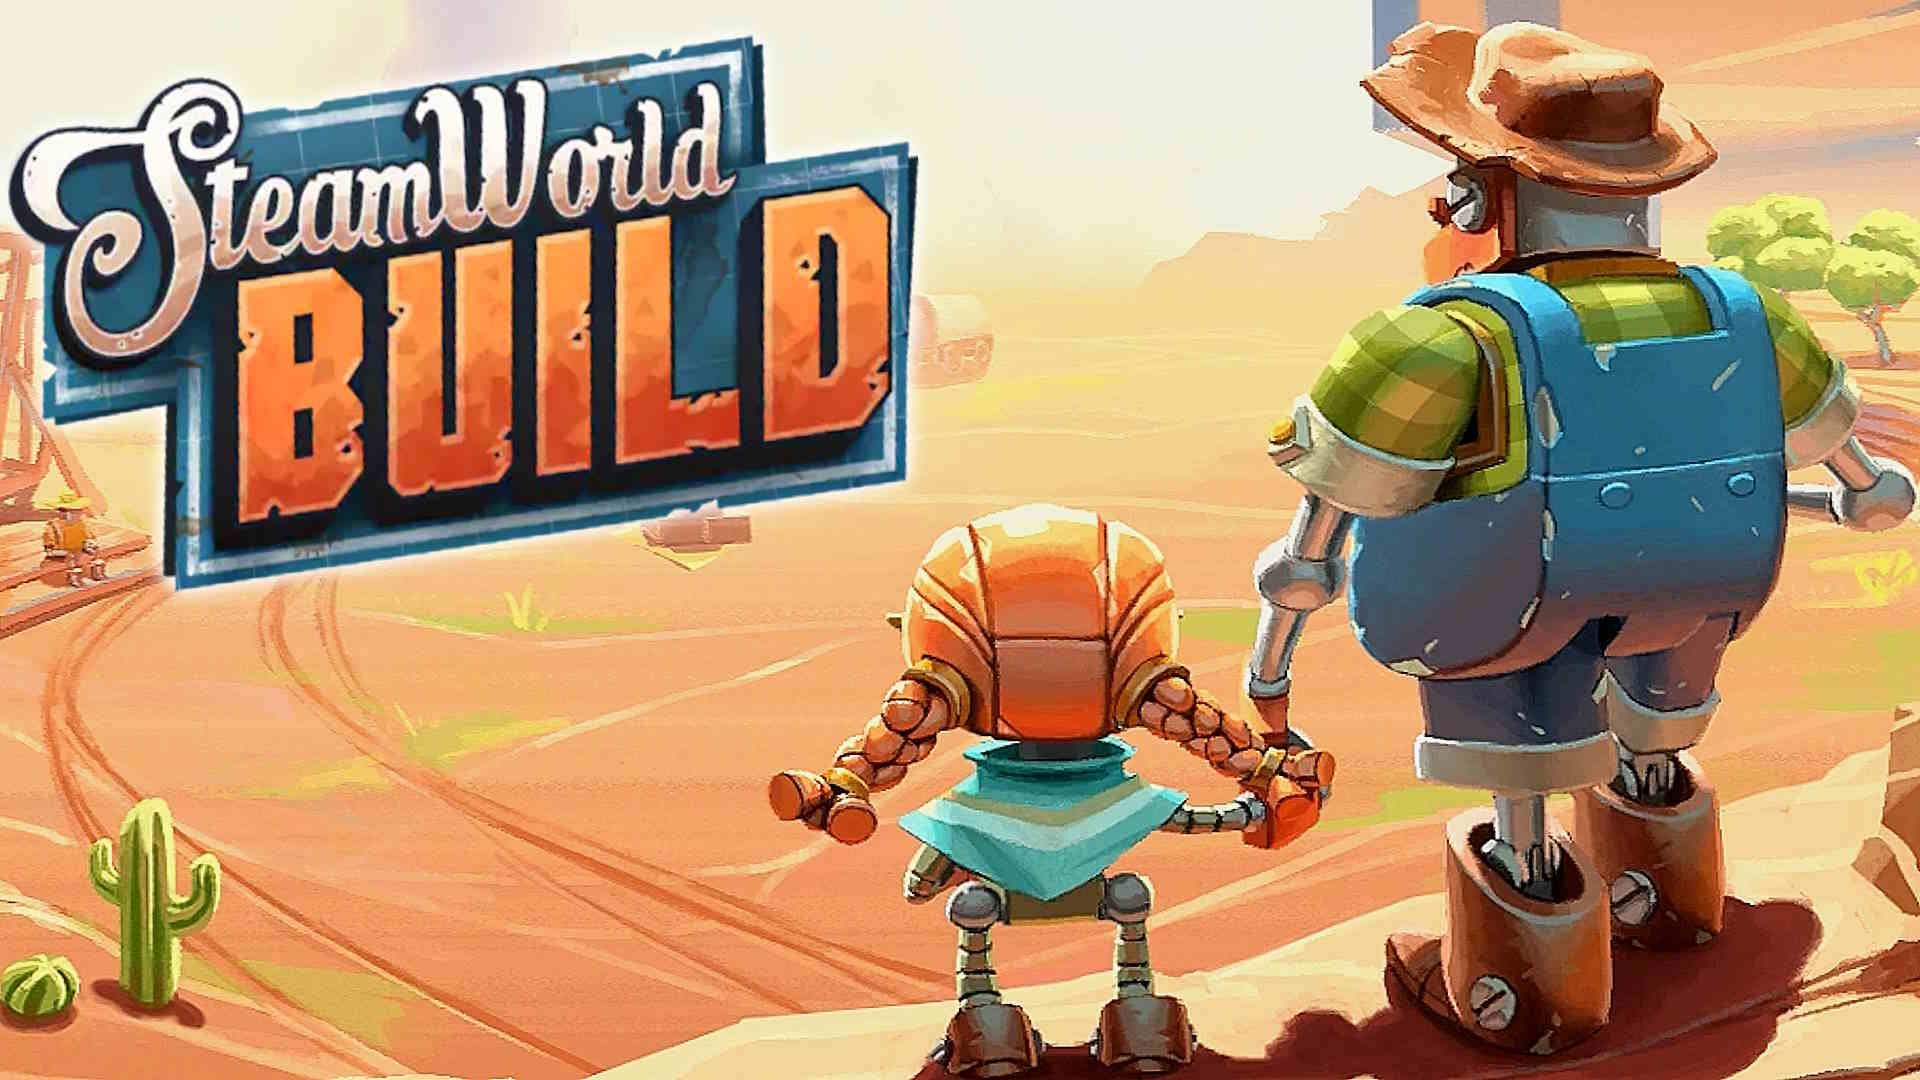 SteamWorld Build: Crafting a New Era in Gaming